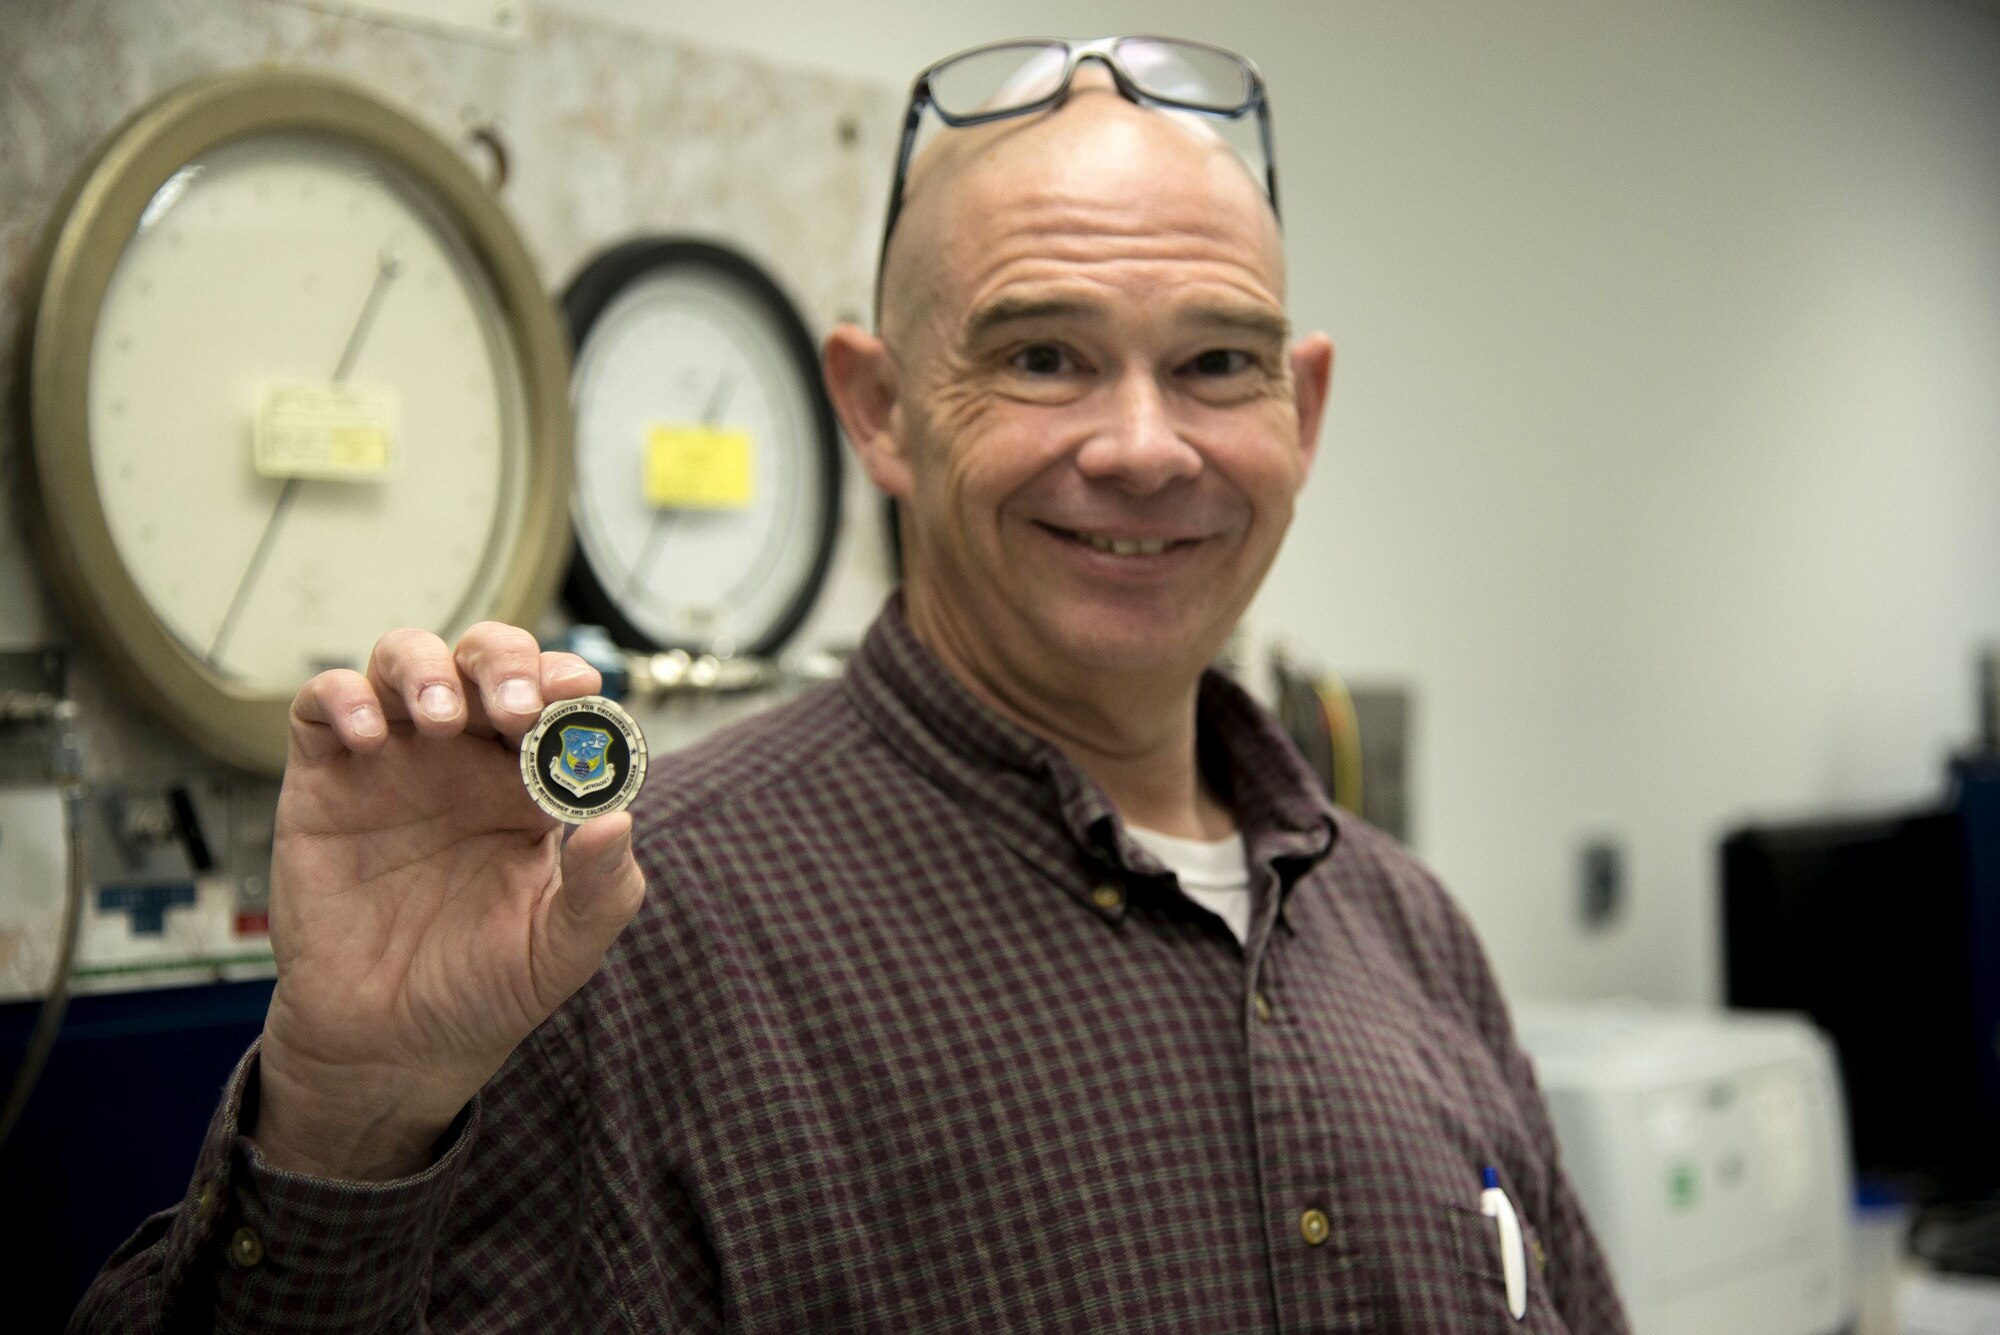 Dave McMillan, quality assurance evaluator for Kirtland’s Precision Measurement Equipment Laboratory, was presented with an AFMETCAL Excellence Coin in recognition of his outstanding work as a quality assurance evaluator during a recent inspection.